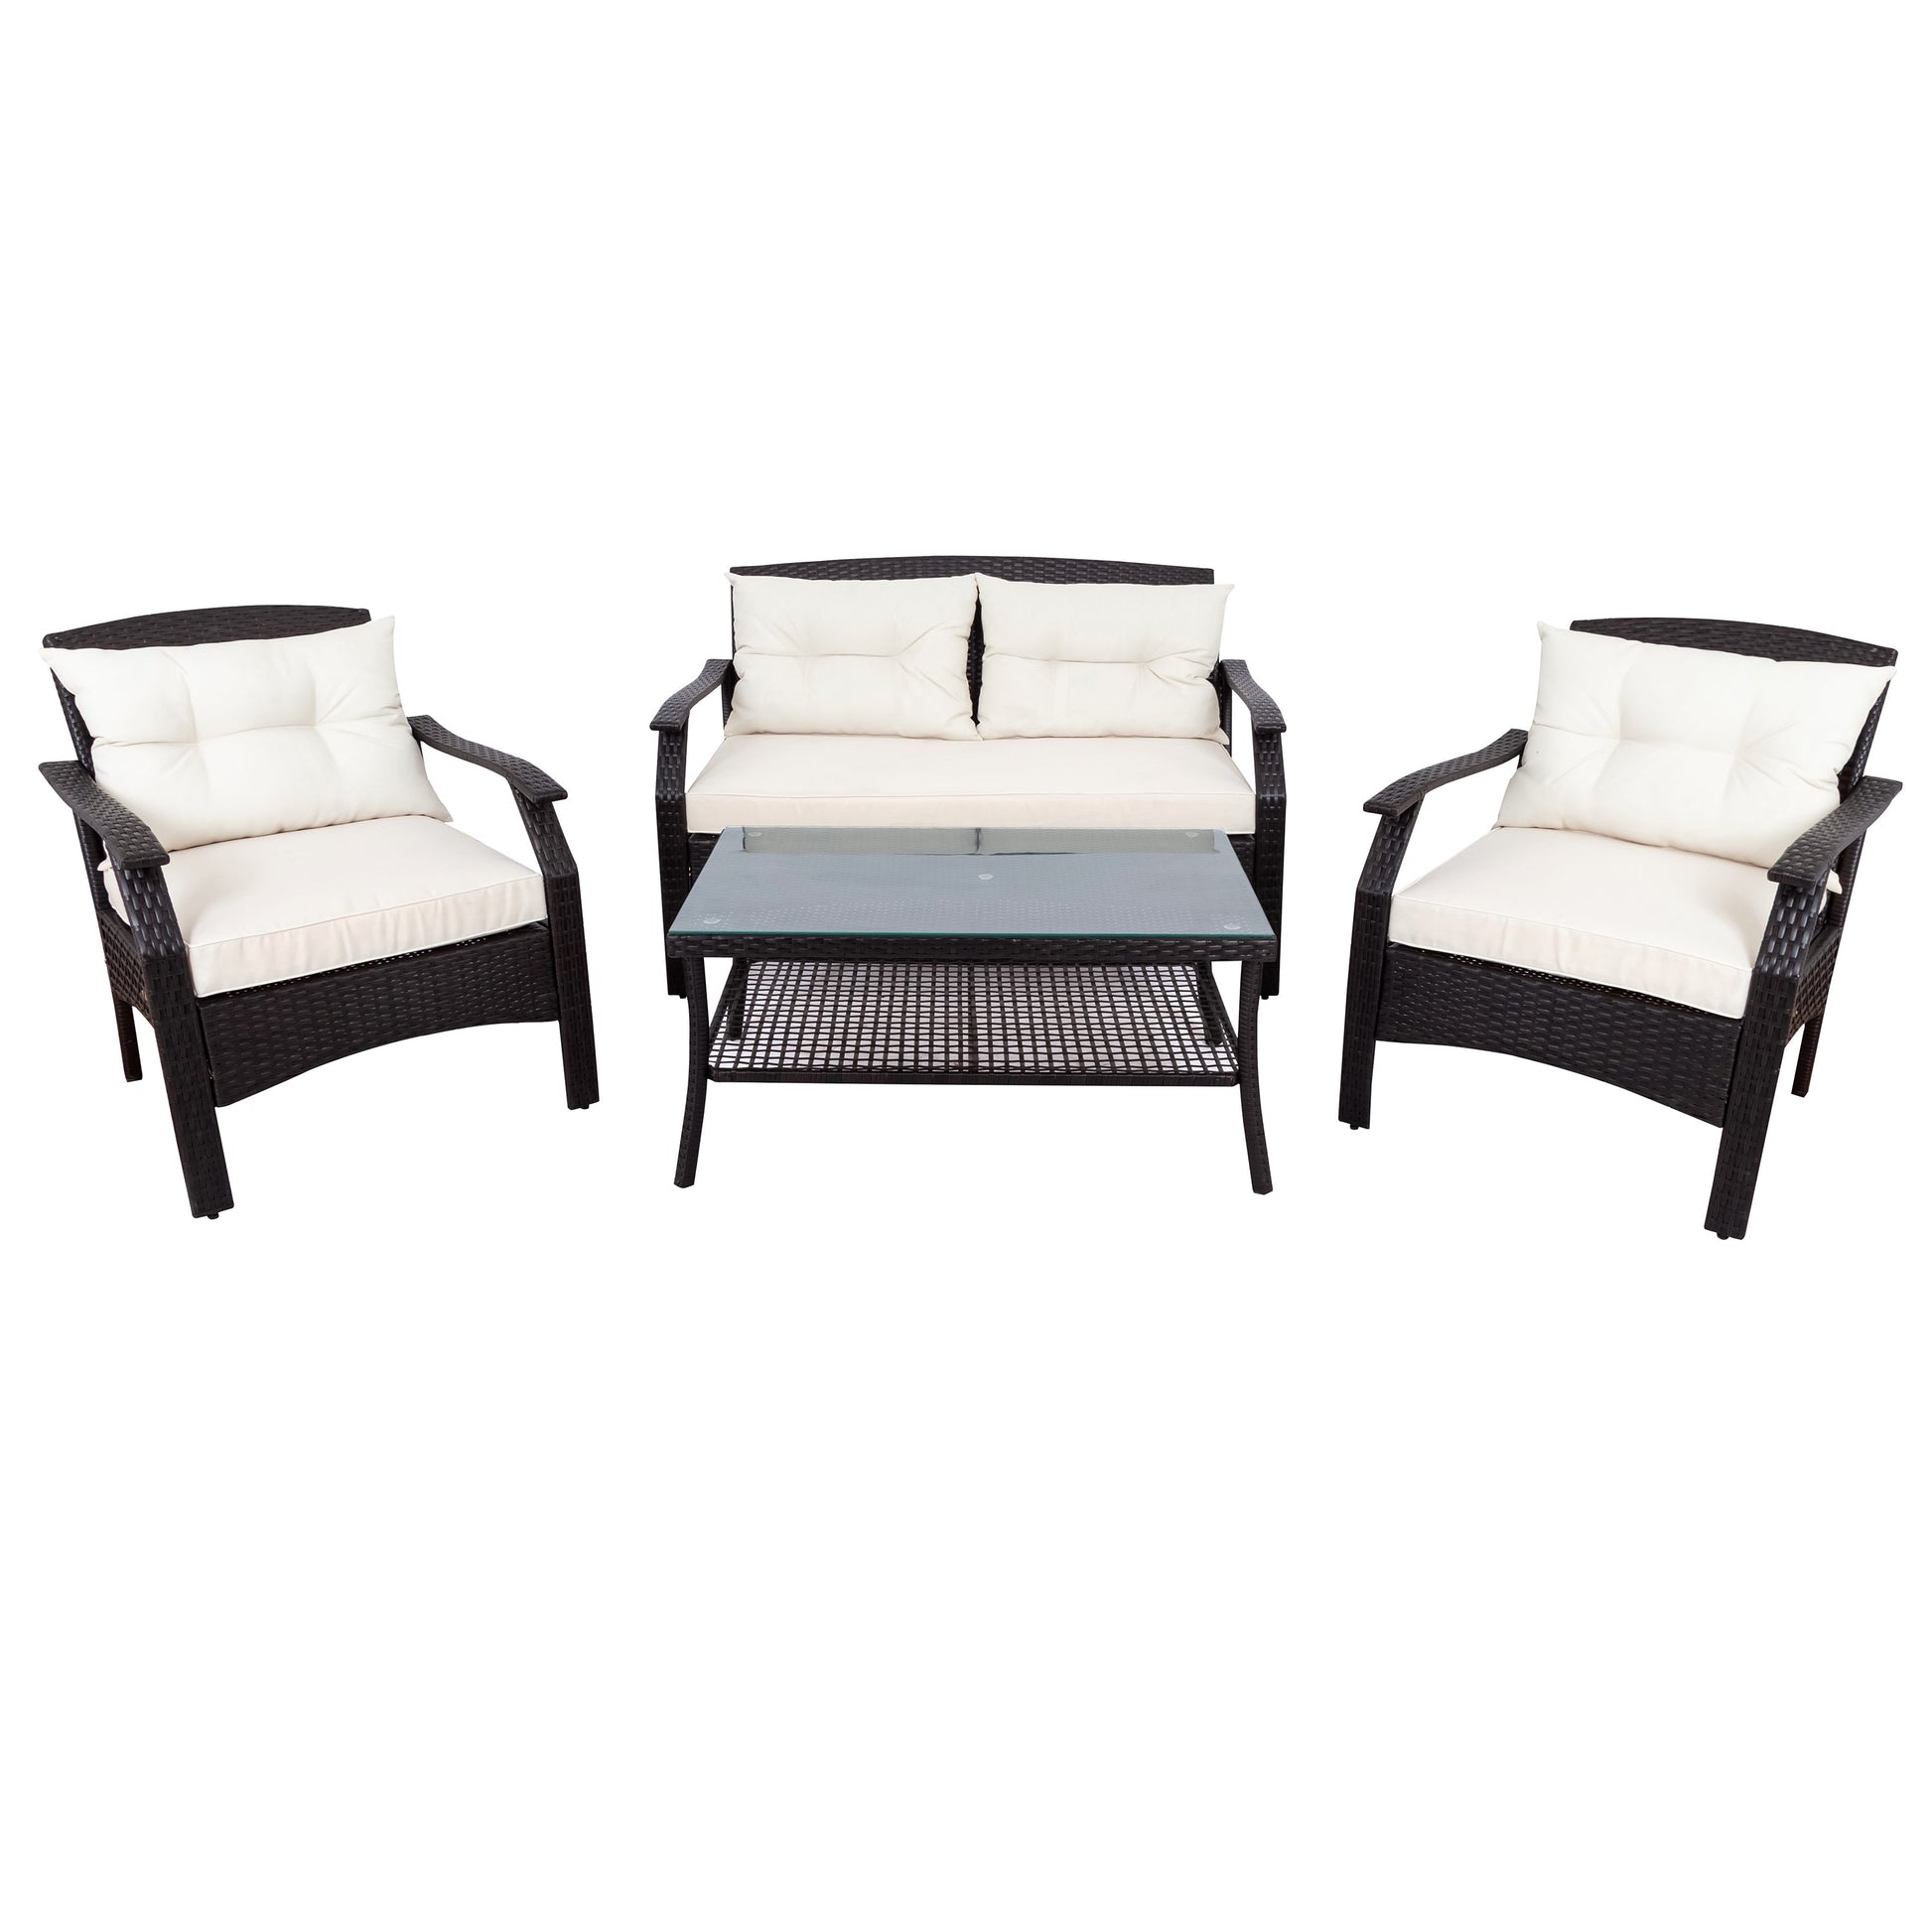 Rattan Sofa Seating Group with Cushions 4 pc - Demine Essentials